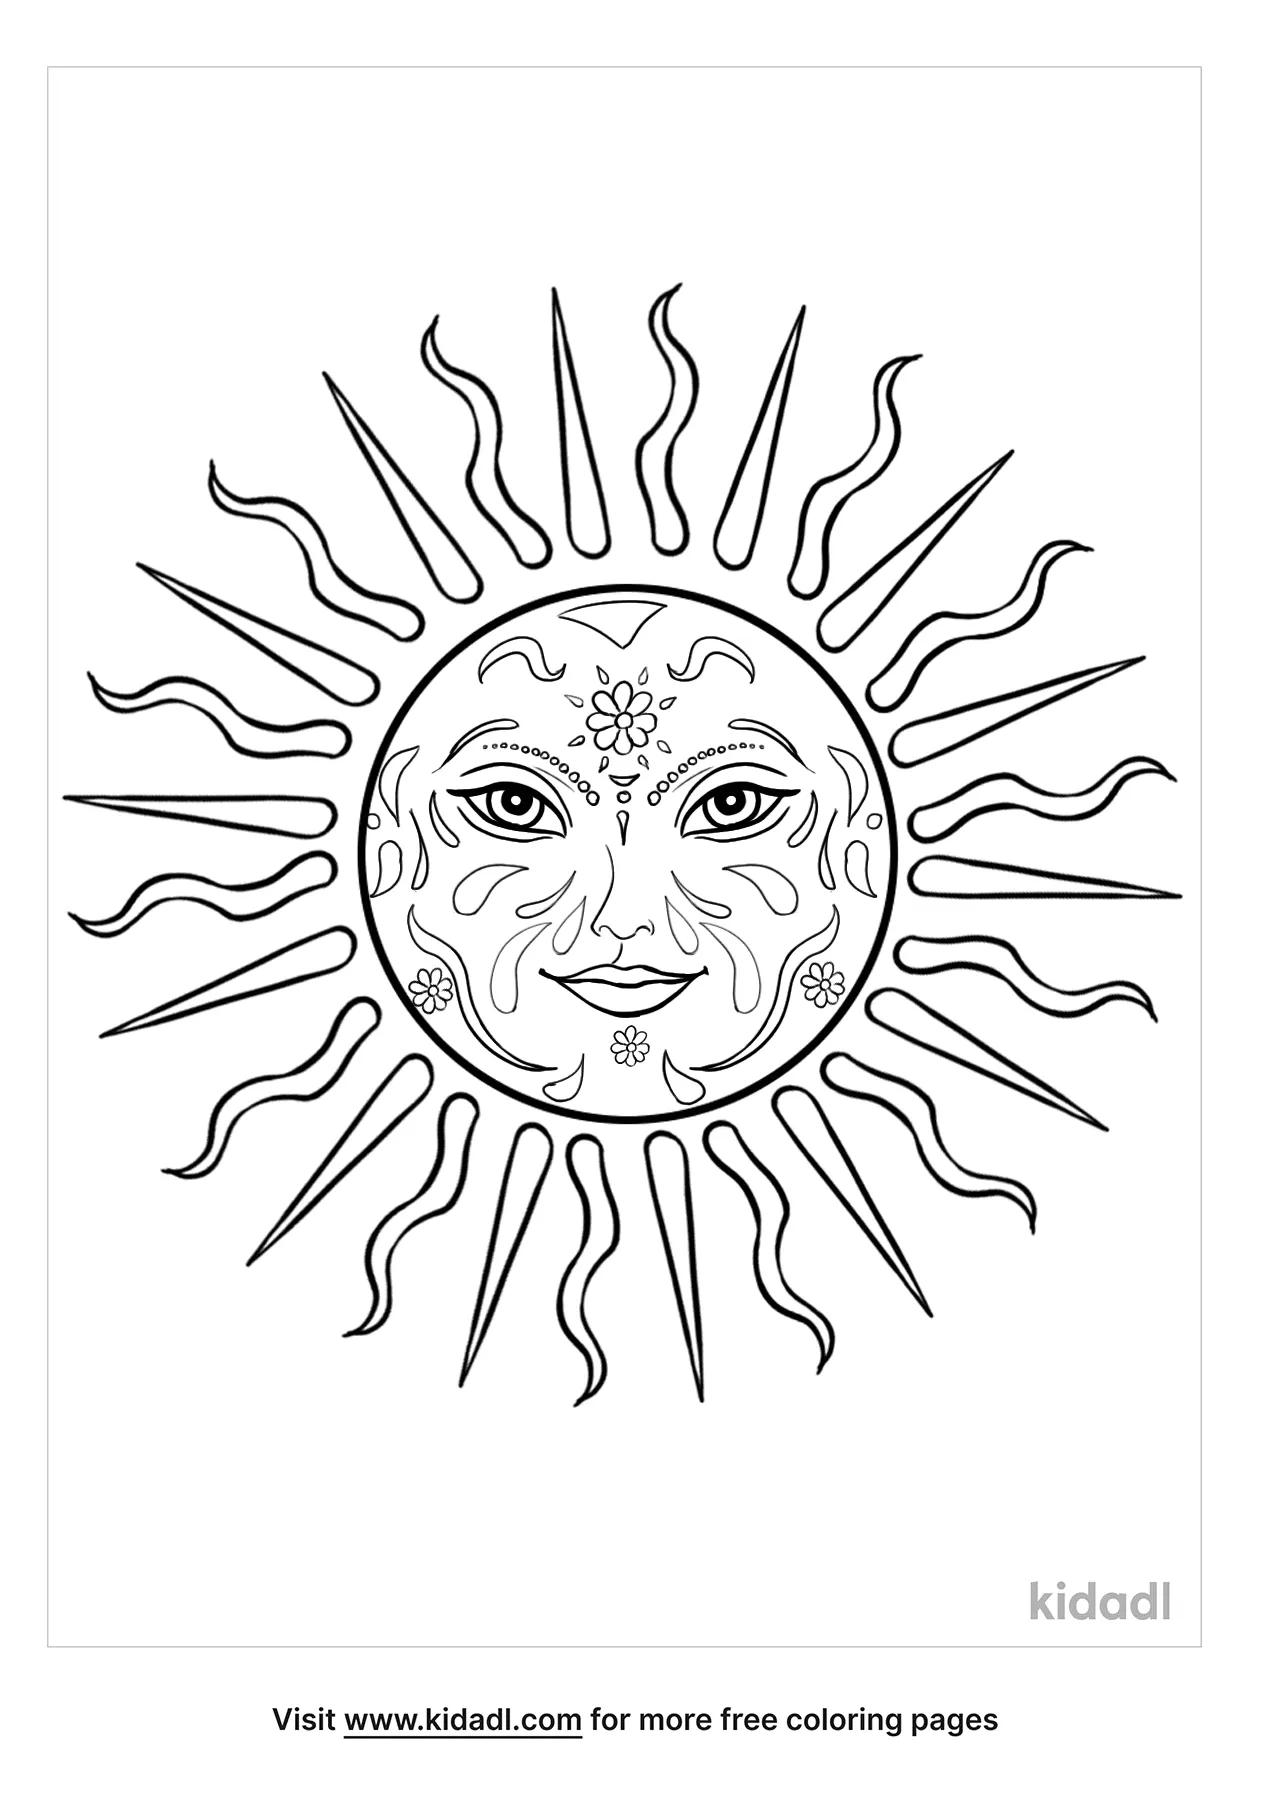 Celestial Sun Coloring Page